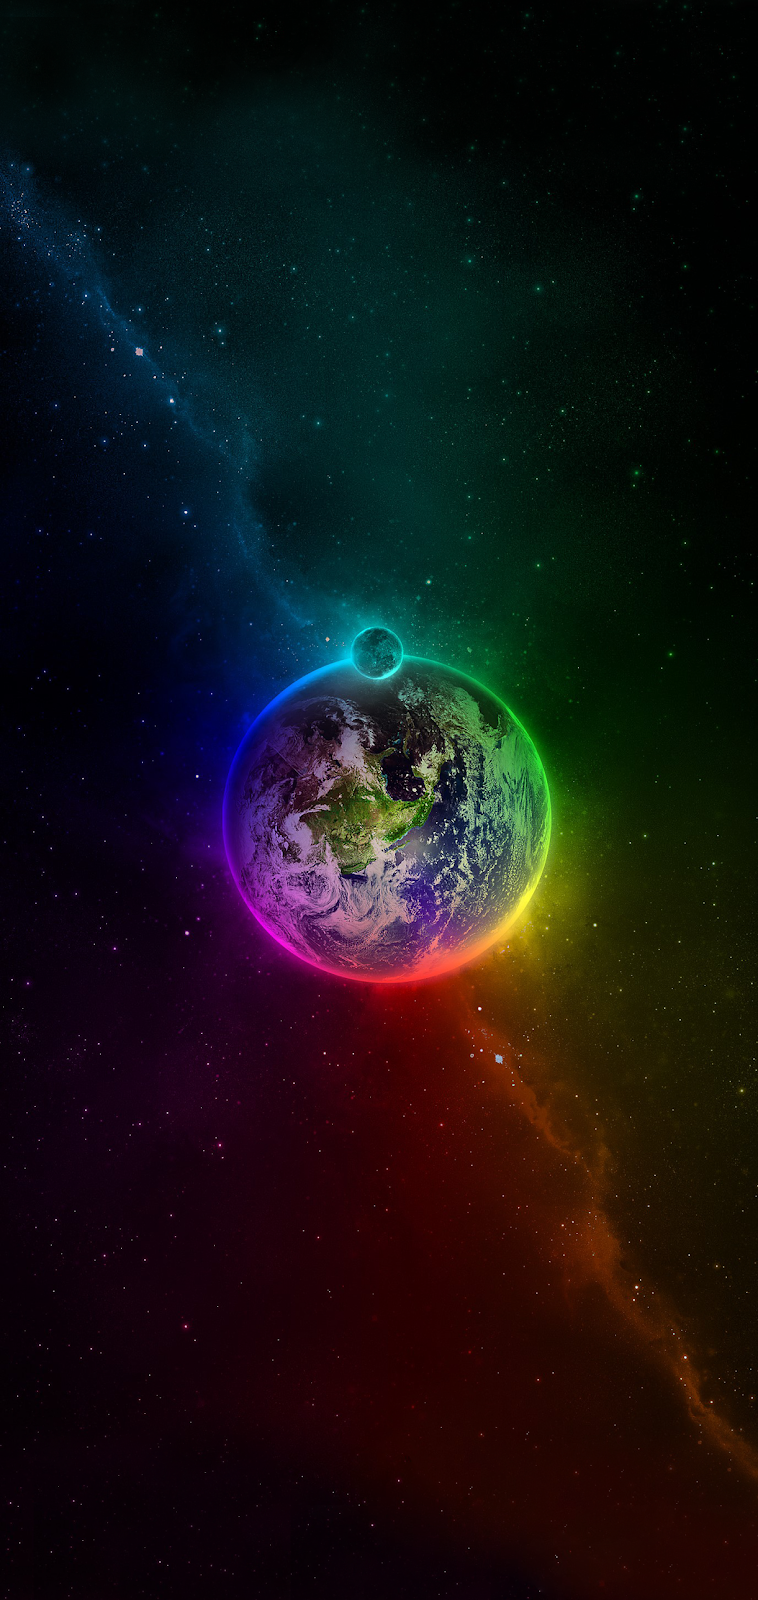 Colorful Earth #wallpaper #iphone #android #background #followme. Cool wallpaper for phones, Night sky wallpaper, Neon wallpaper